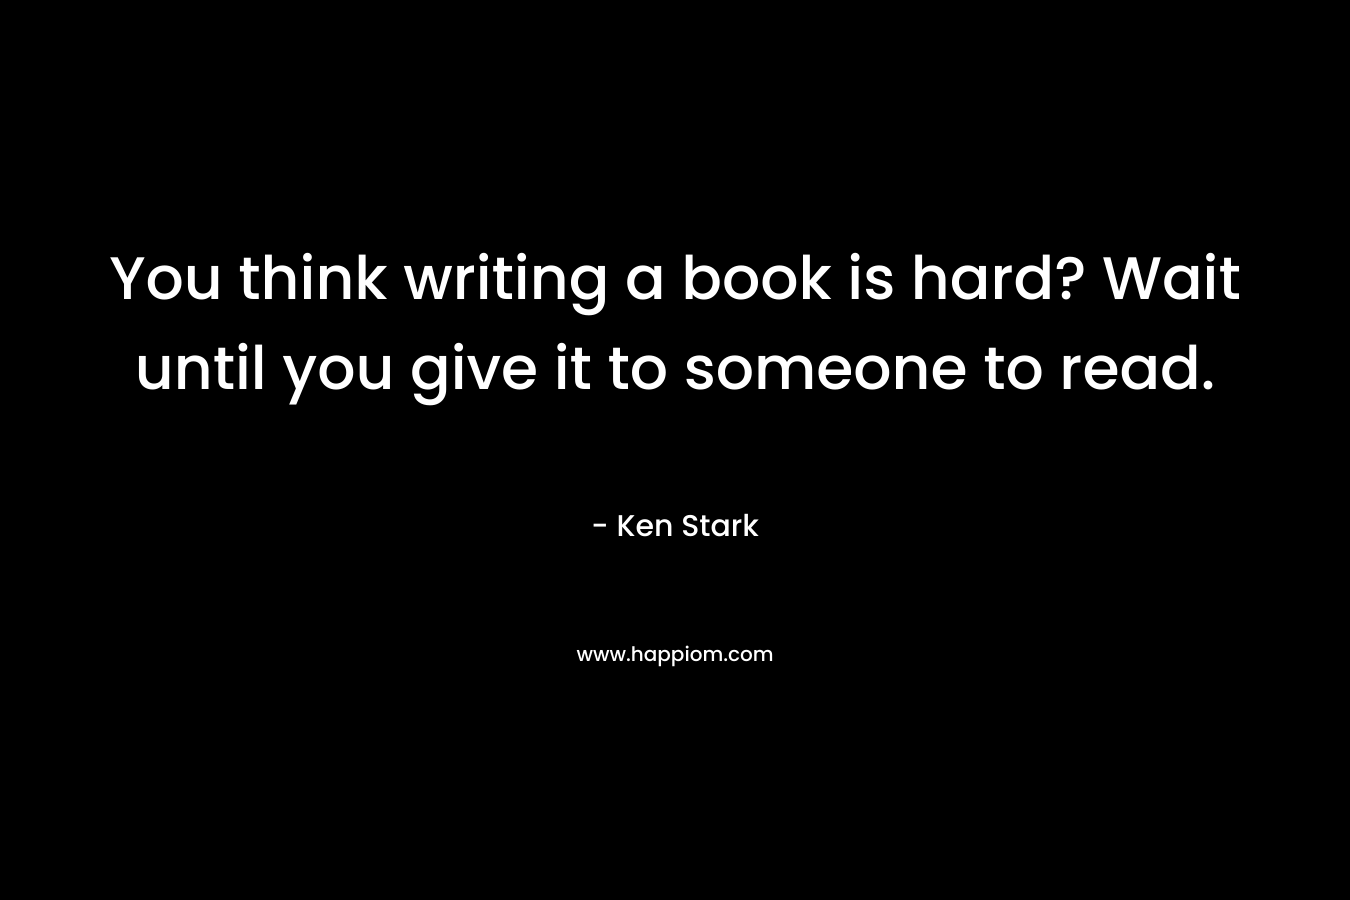 You think writing a book is hard? Wait until you give it to someone to read.